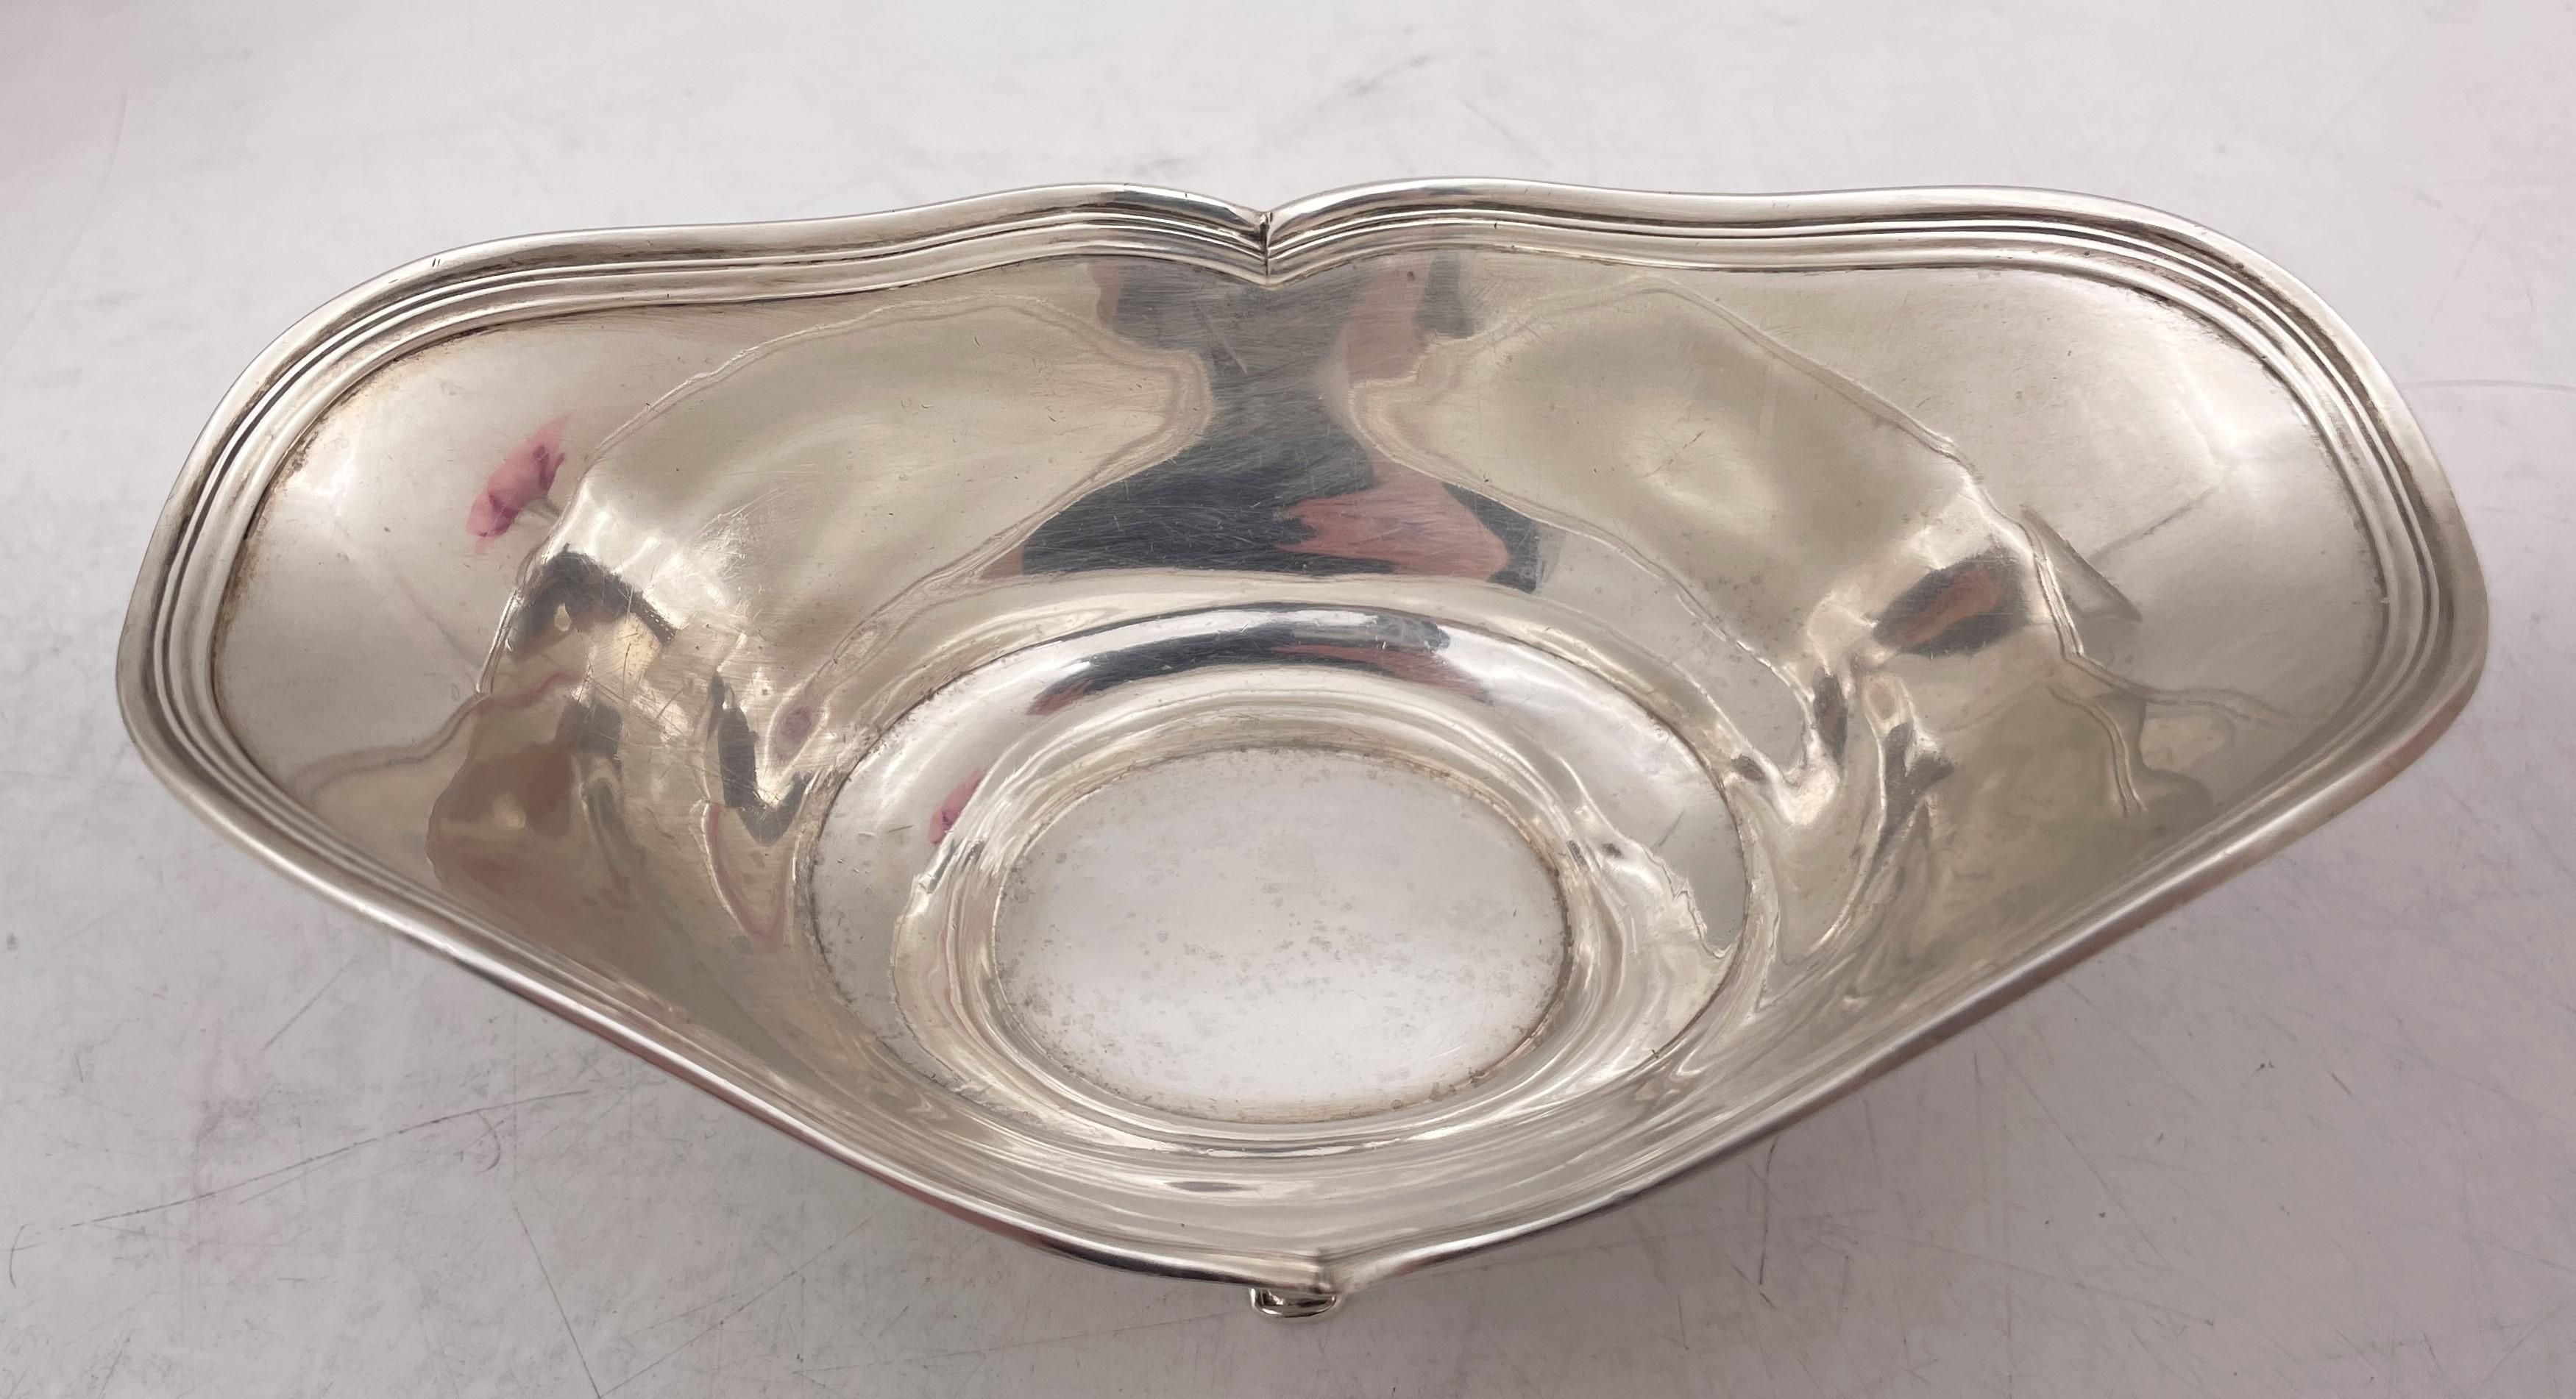 Tiffany & Co. Sterling Silver 1903 Condiment Dish / Bowl in Art Deco Style In Good Condition For Sale In New York, NY